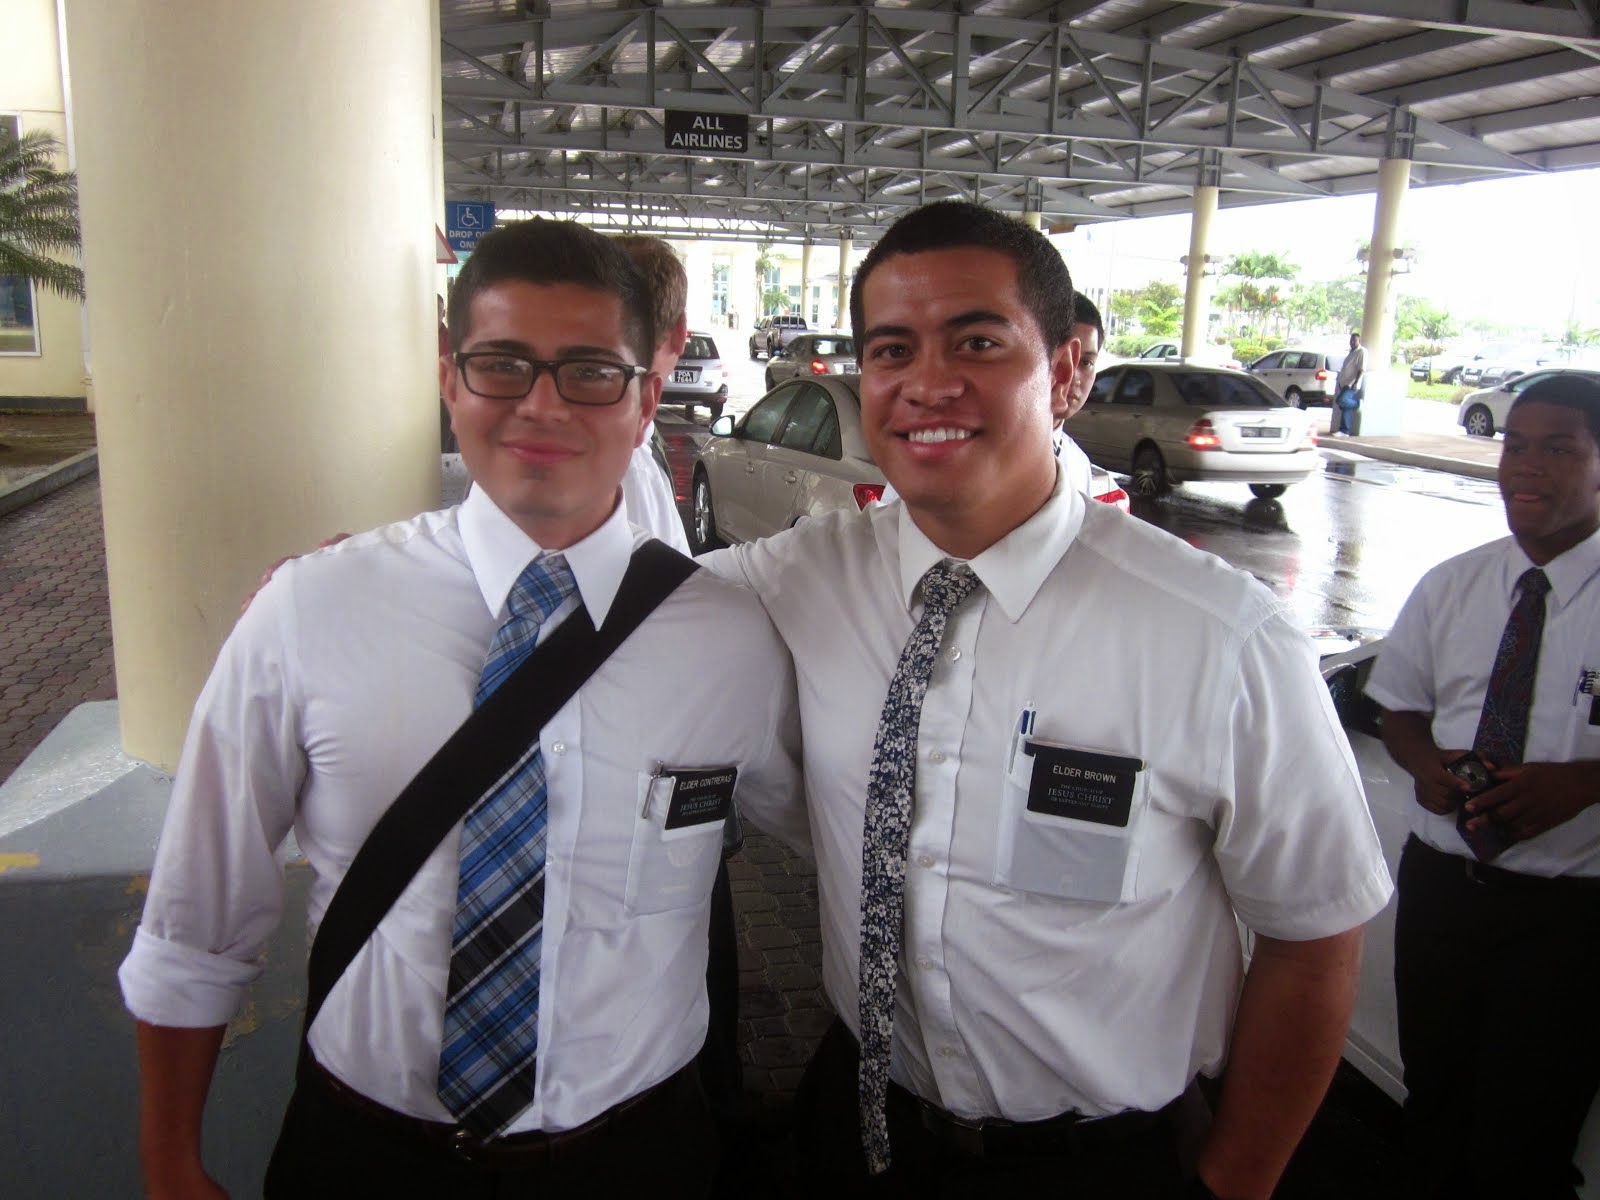 Dropping off the missionaries to the airport.